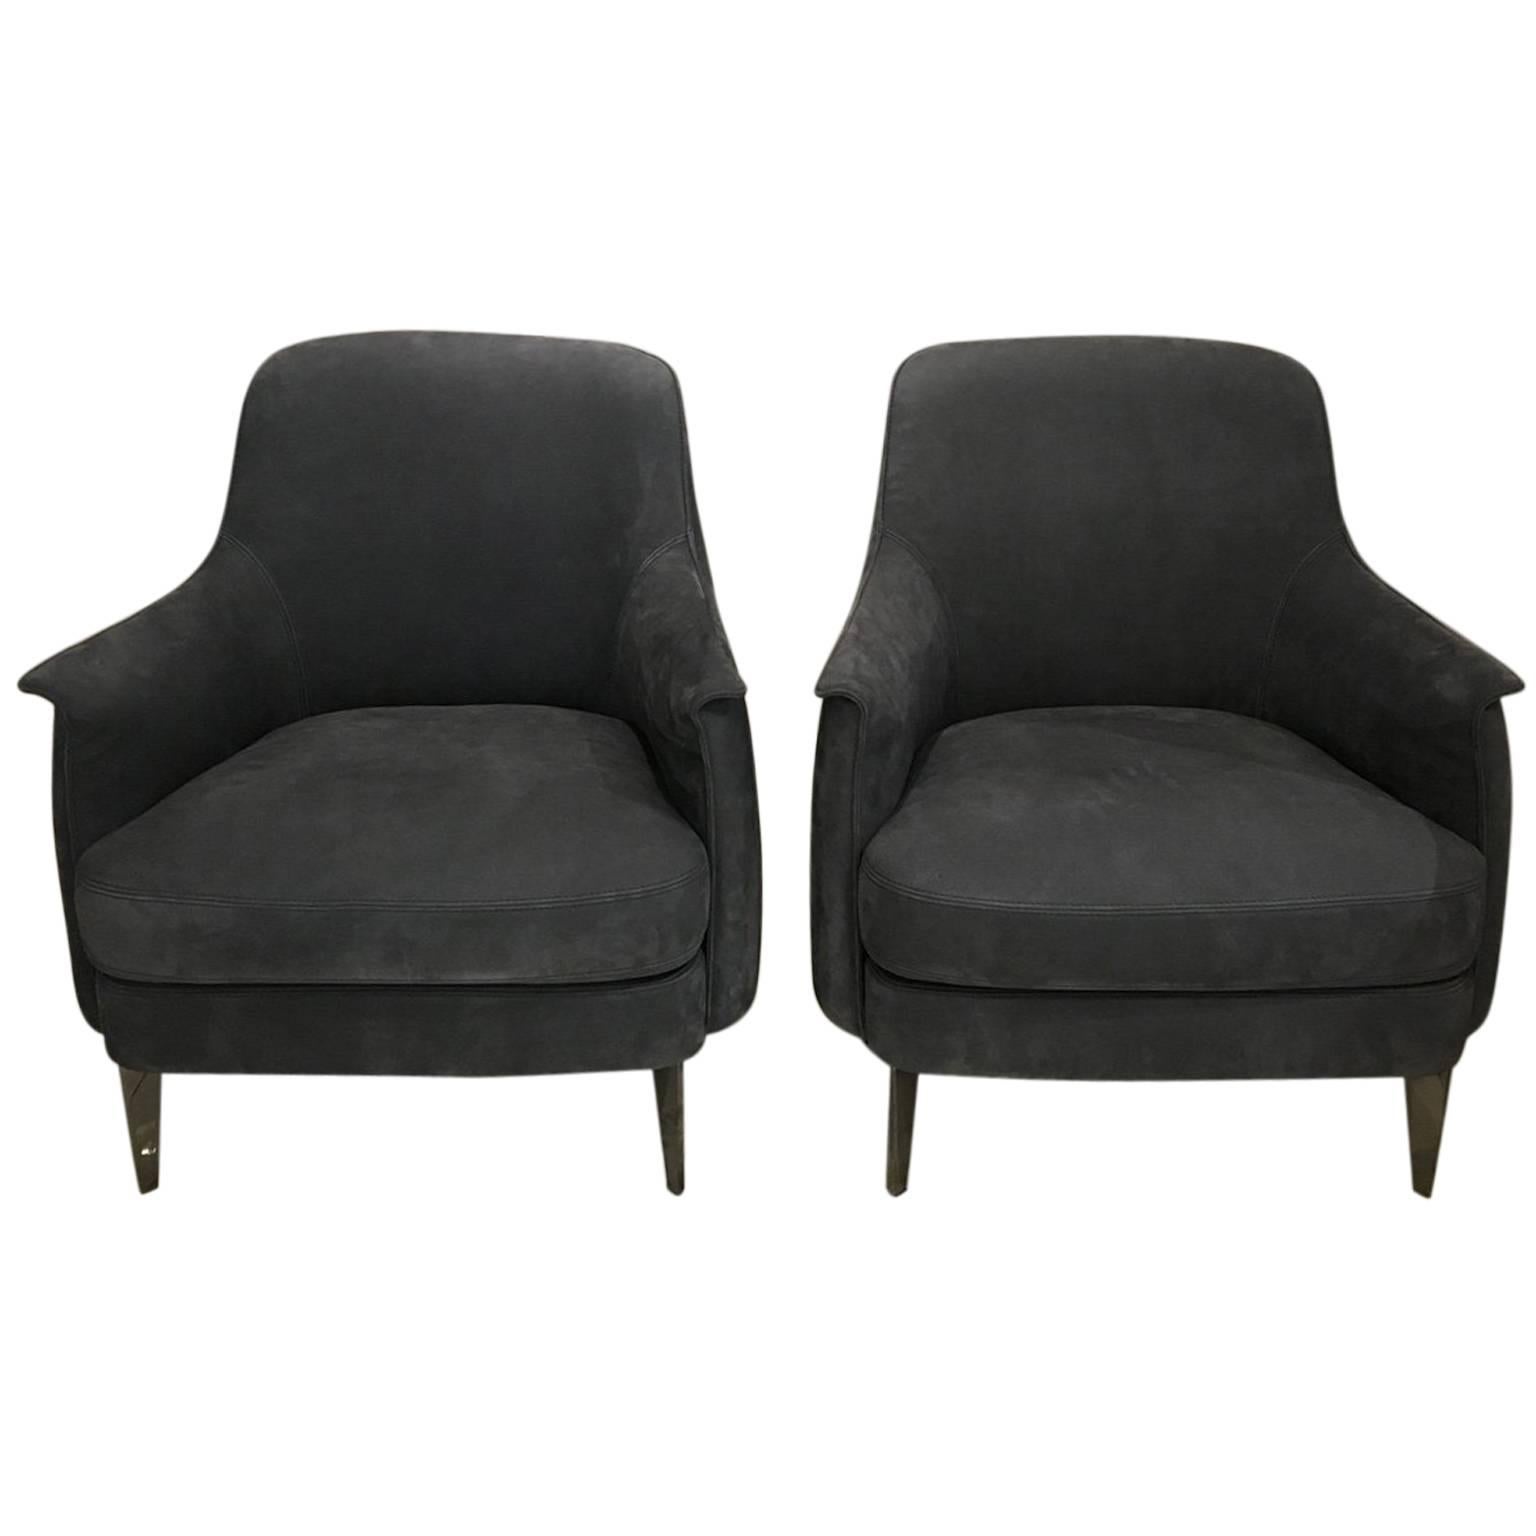 Pair of Armchairs in Light Grey Nubuk Leather with Black Chrome Legs by Cierre